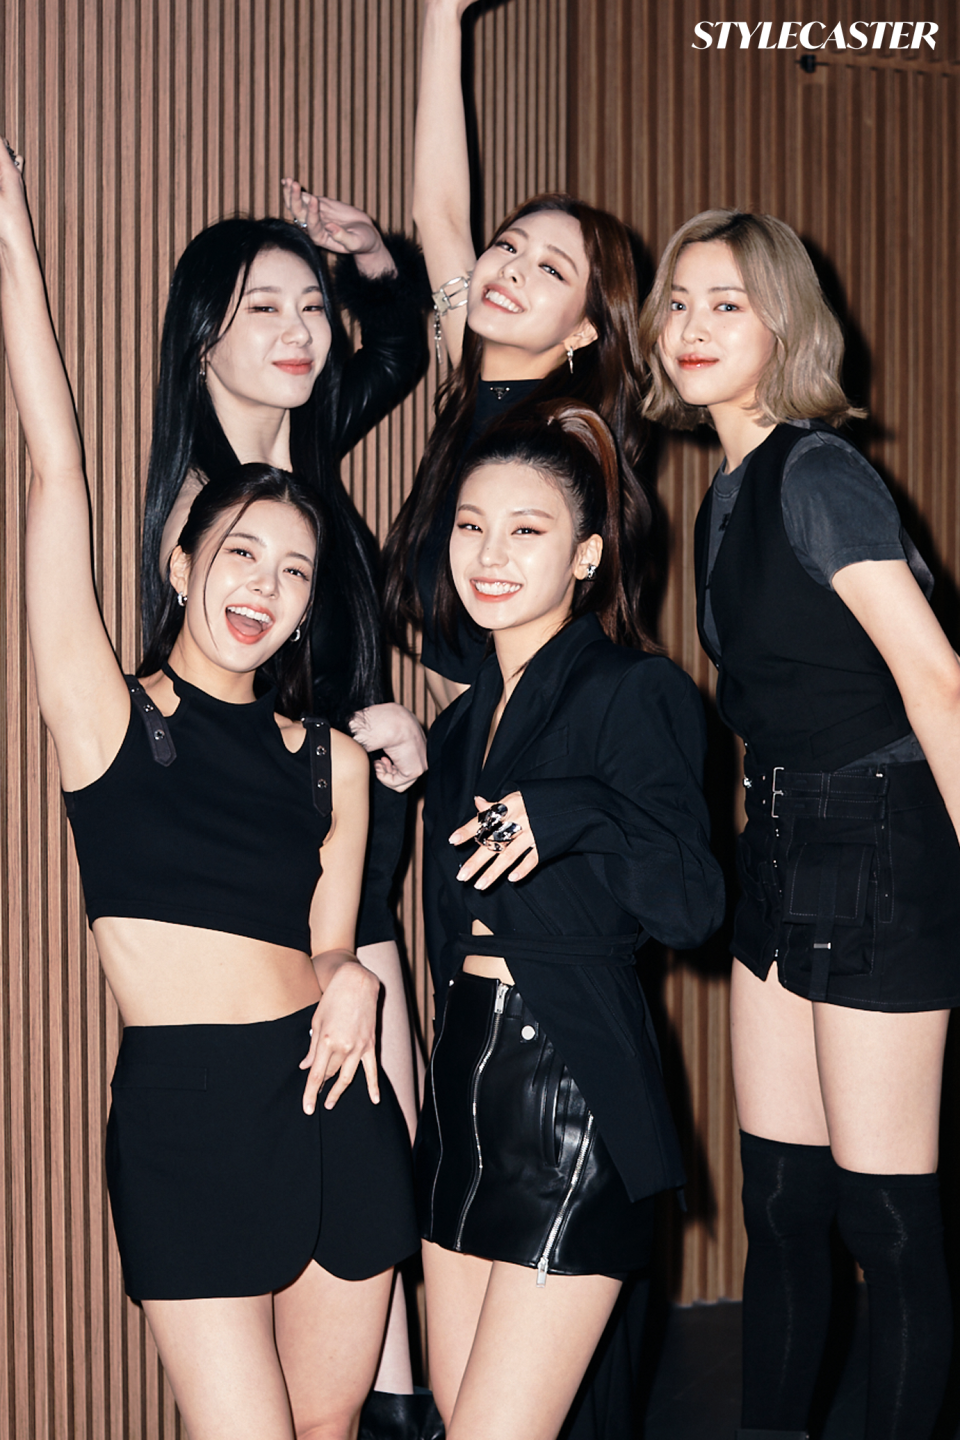 Pictured: (Left to Right) Top: CHAERYEONG, YUNA, RYUJIN Bottom: LIA, YEJI Image: Weston Wells for StyleCaster